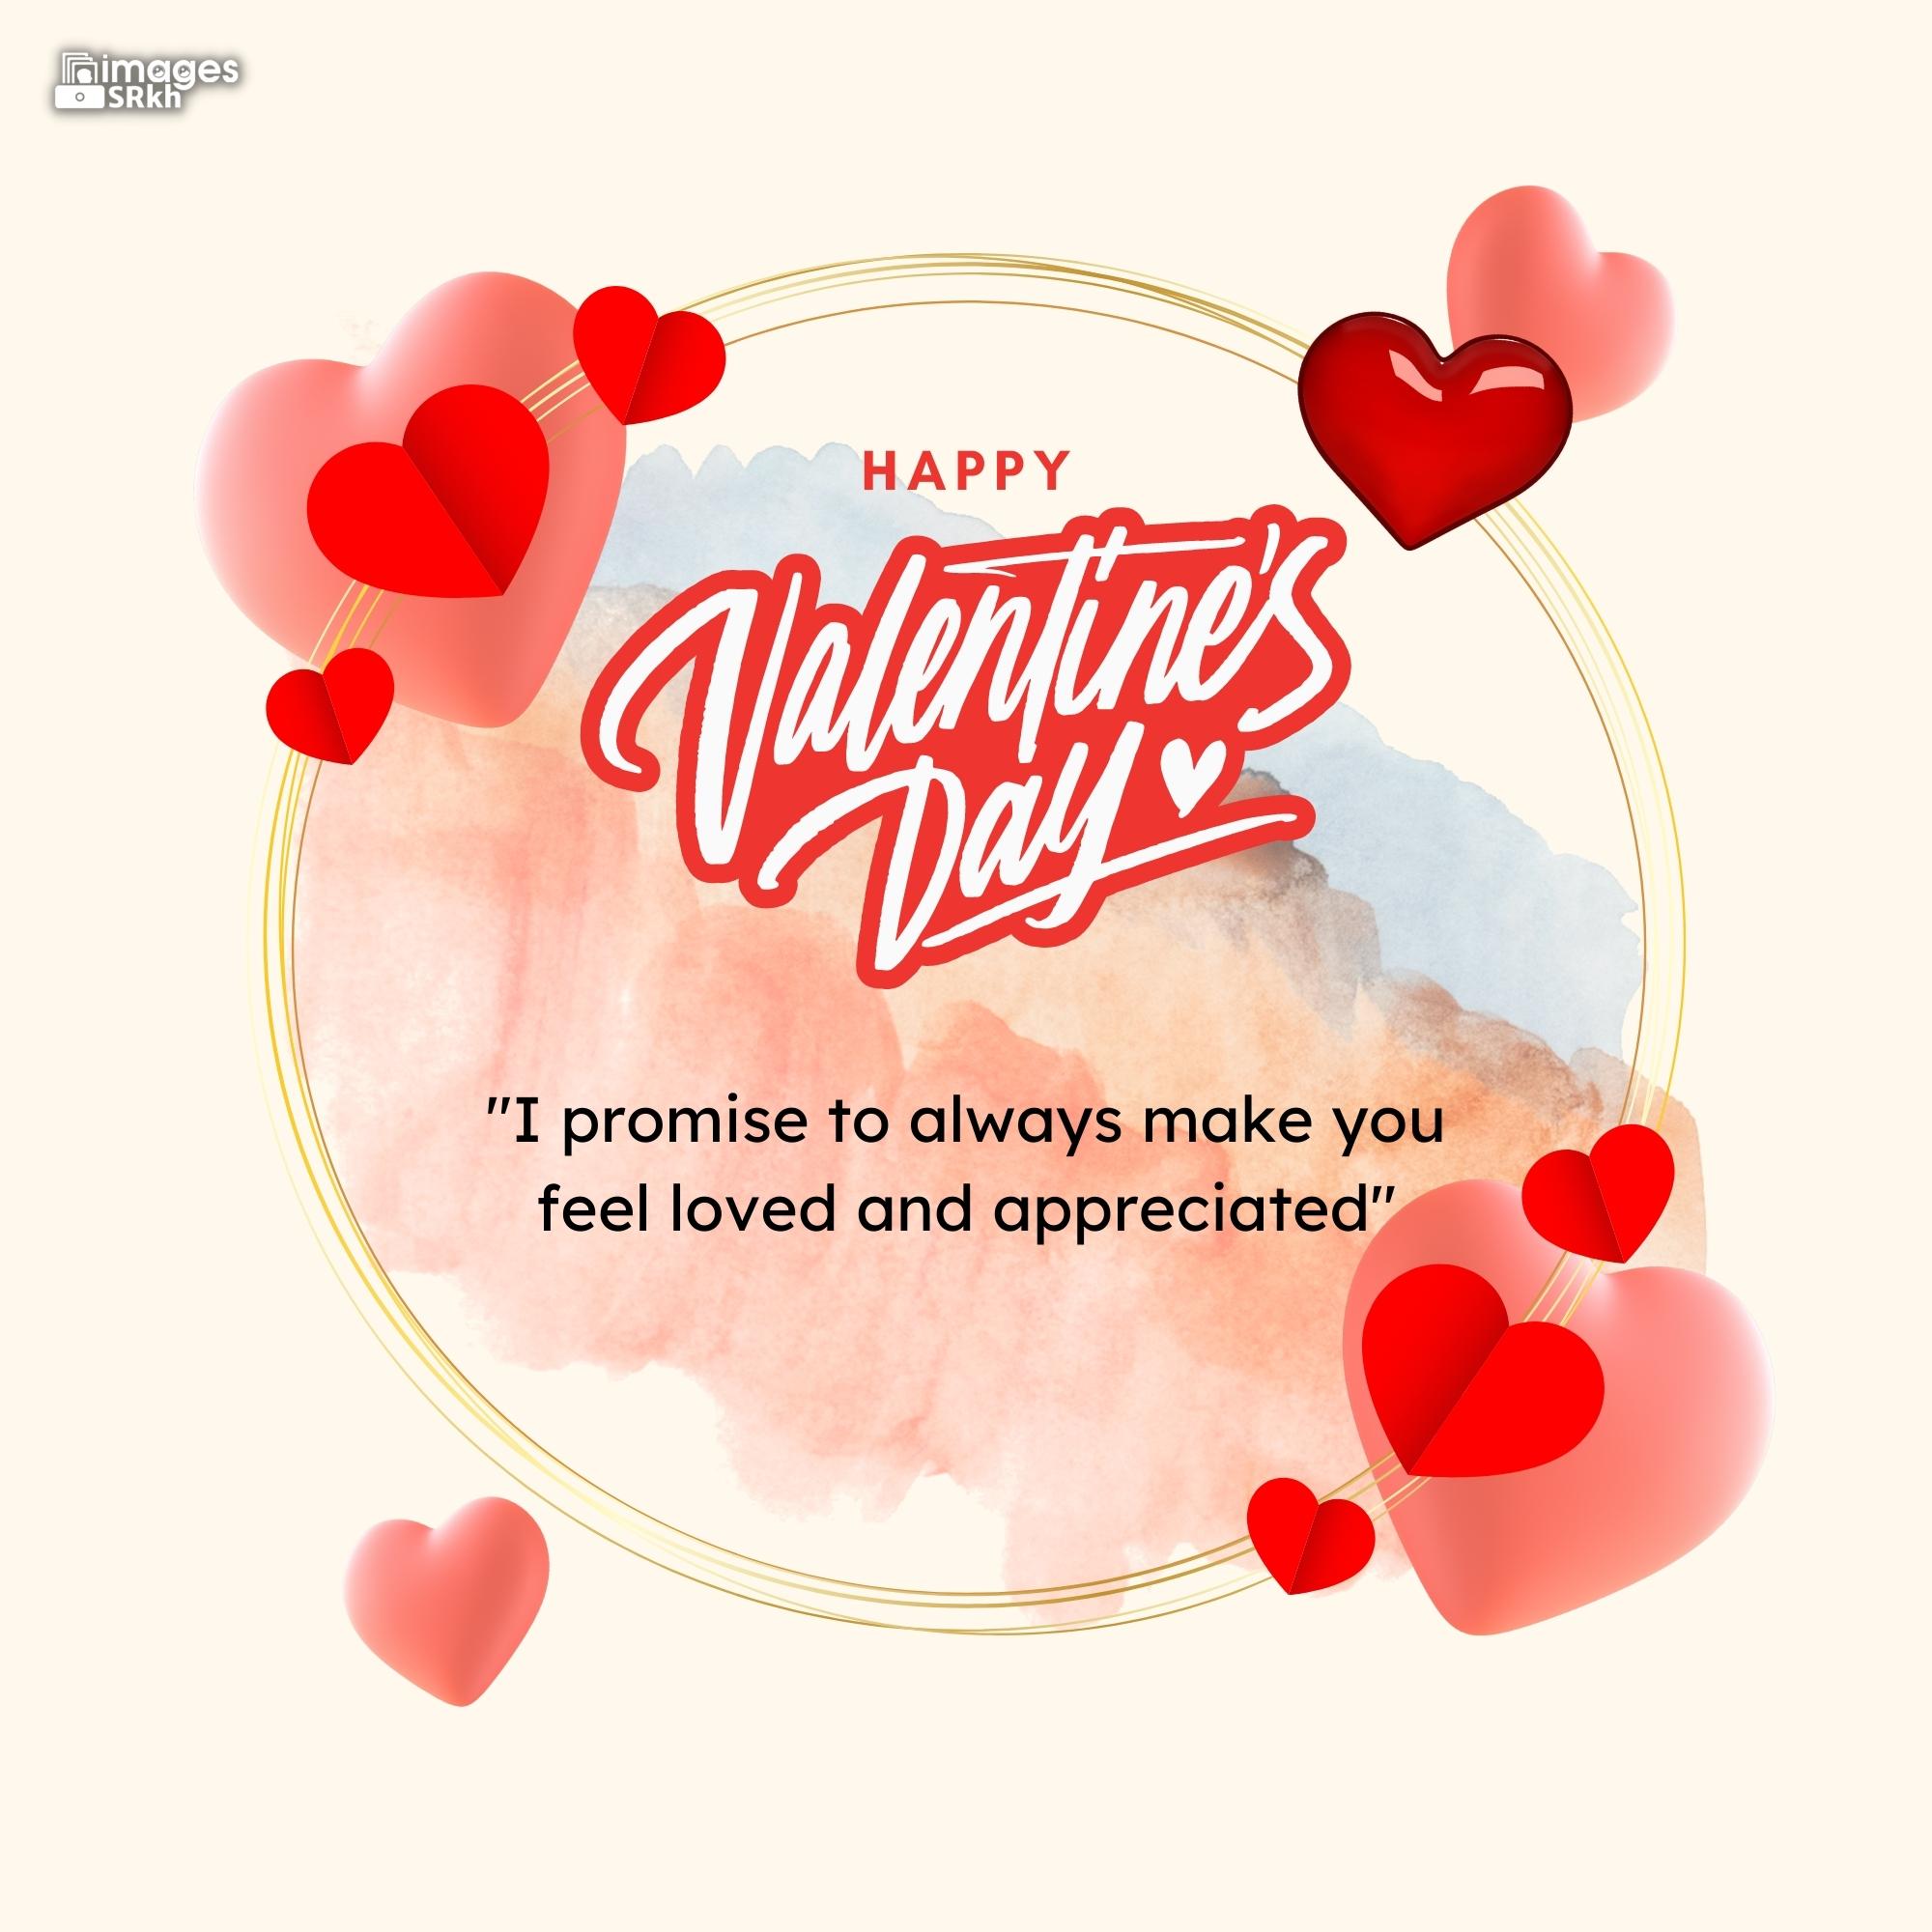 Happy Valentines Day | 510 | PREMIUM IMAGES | Wishes for Love